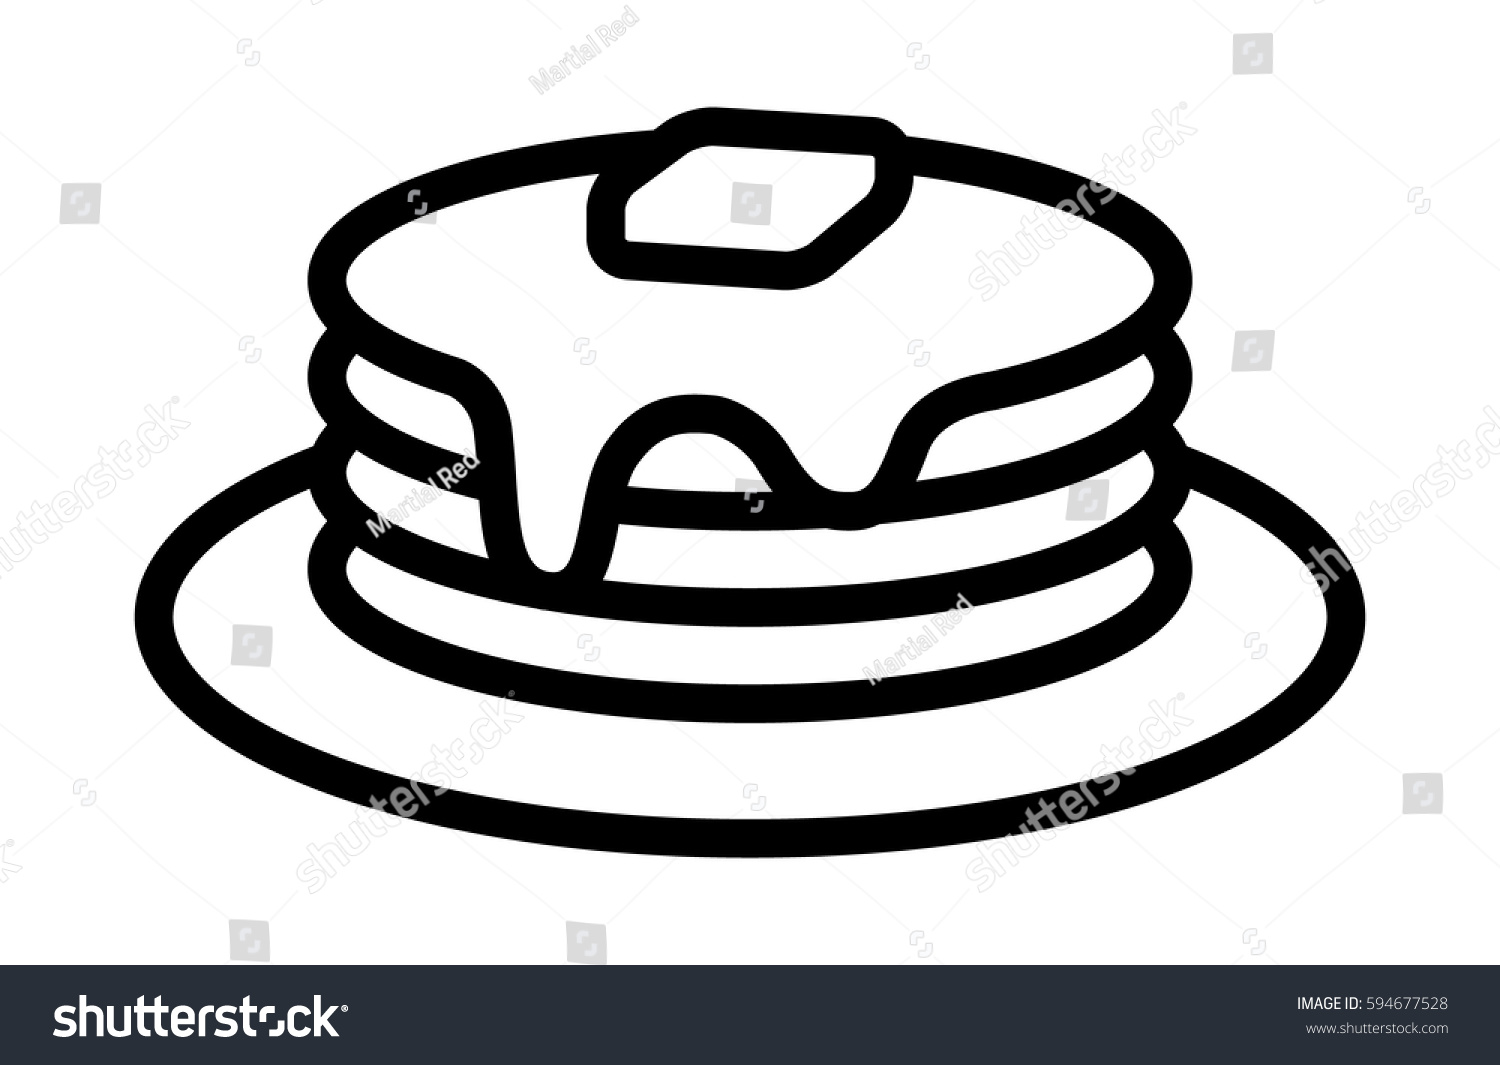 SVG of Breakfast pancakes with syrup and butter on a plate line art vector icon for food apps and websites svg